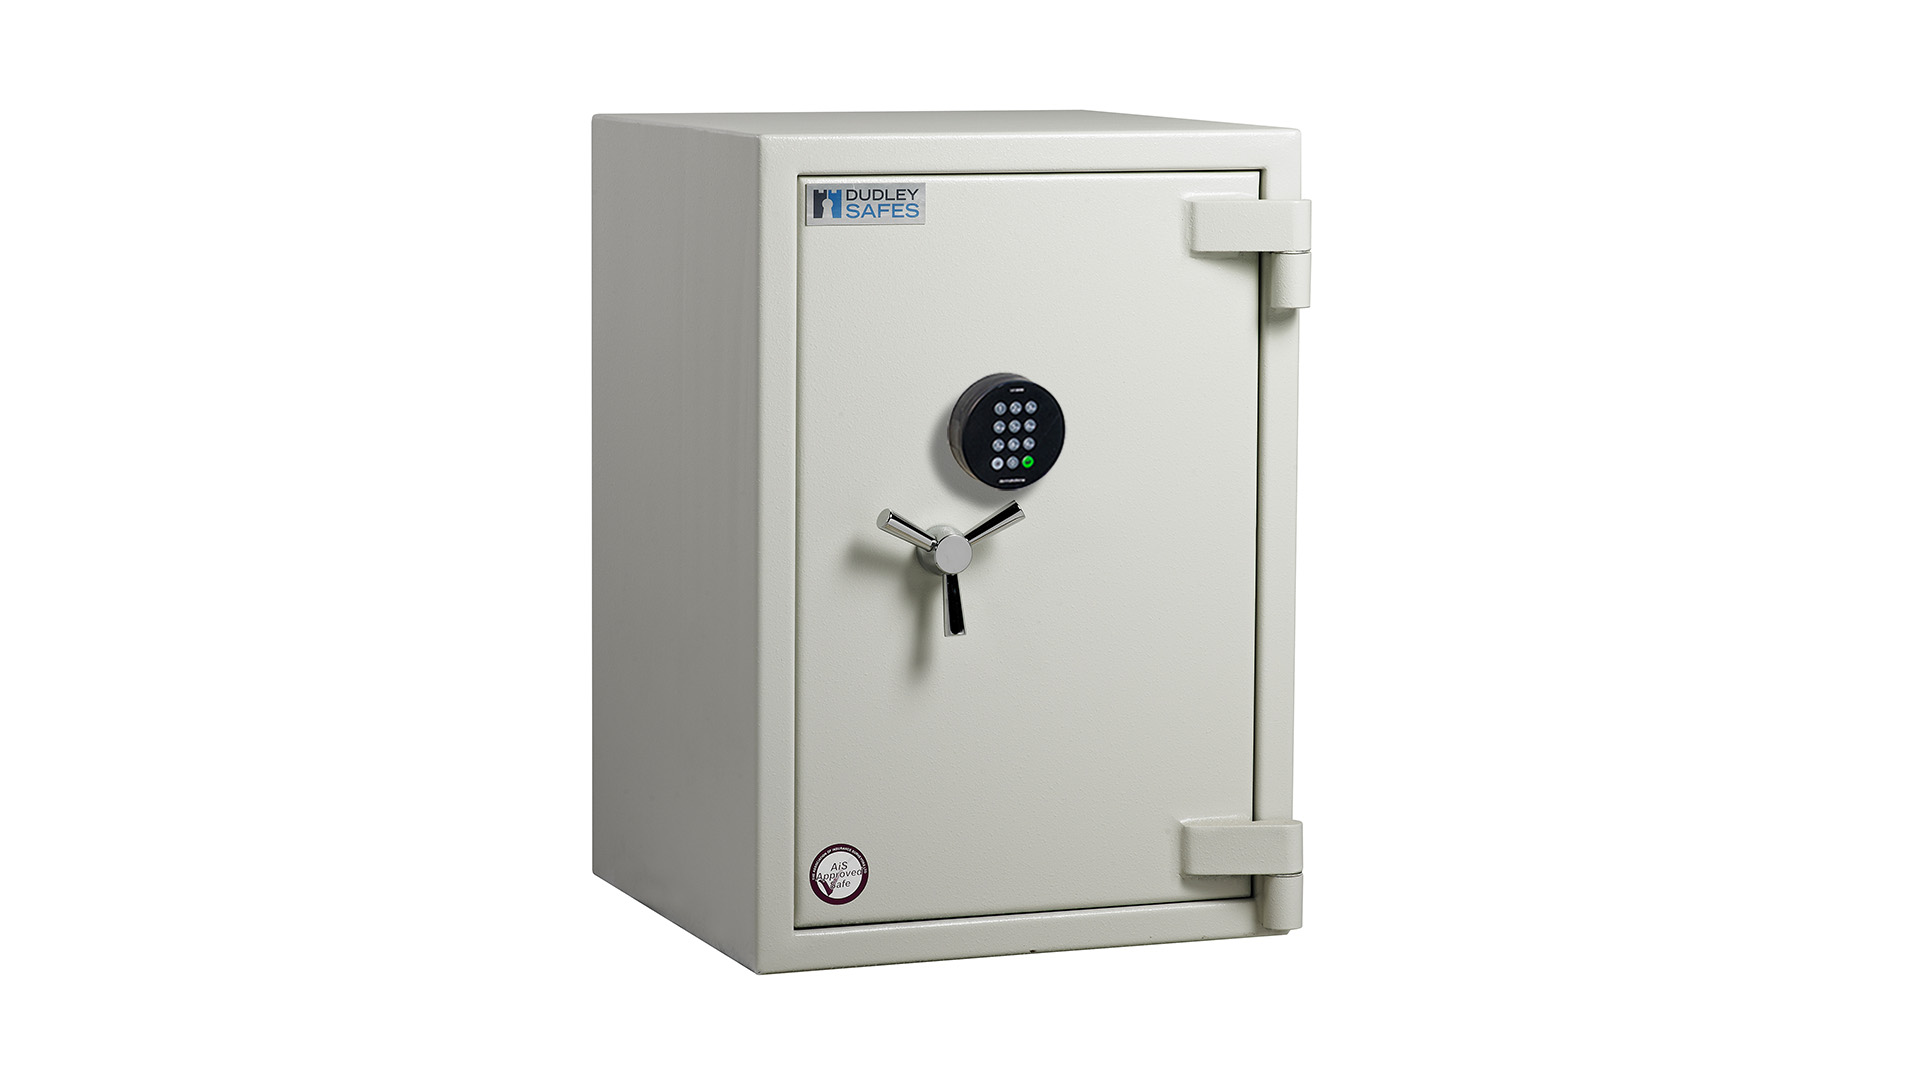 This dudley Europa eur2-04e is a heavy duty hand build euro grade 2 security safe for the home, office safe and commercial safe. Fine quality to rival the very best, however, its priced to sell. This is shown with a high quality electronic code lock, but is also available with keylock, mechanical dial lock or multi user code lock if having several users... eg as a jewellers safe.